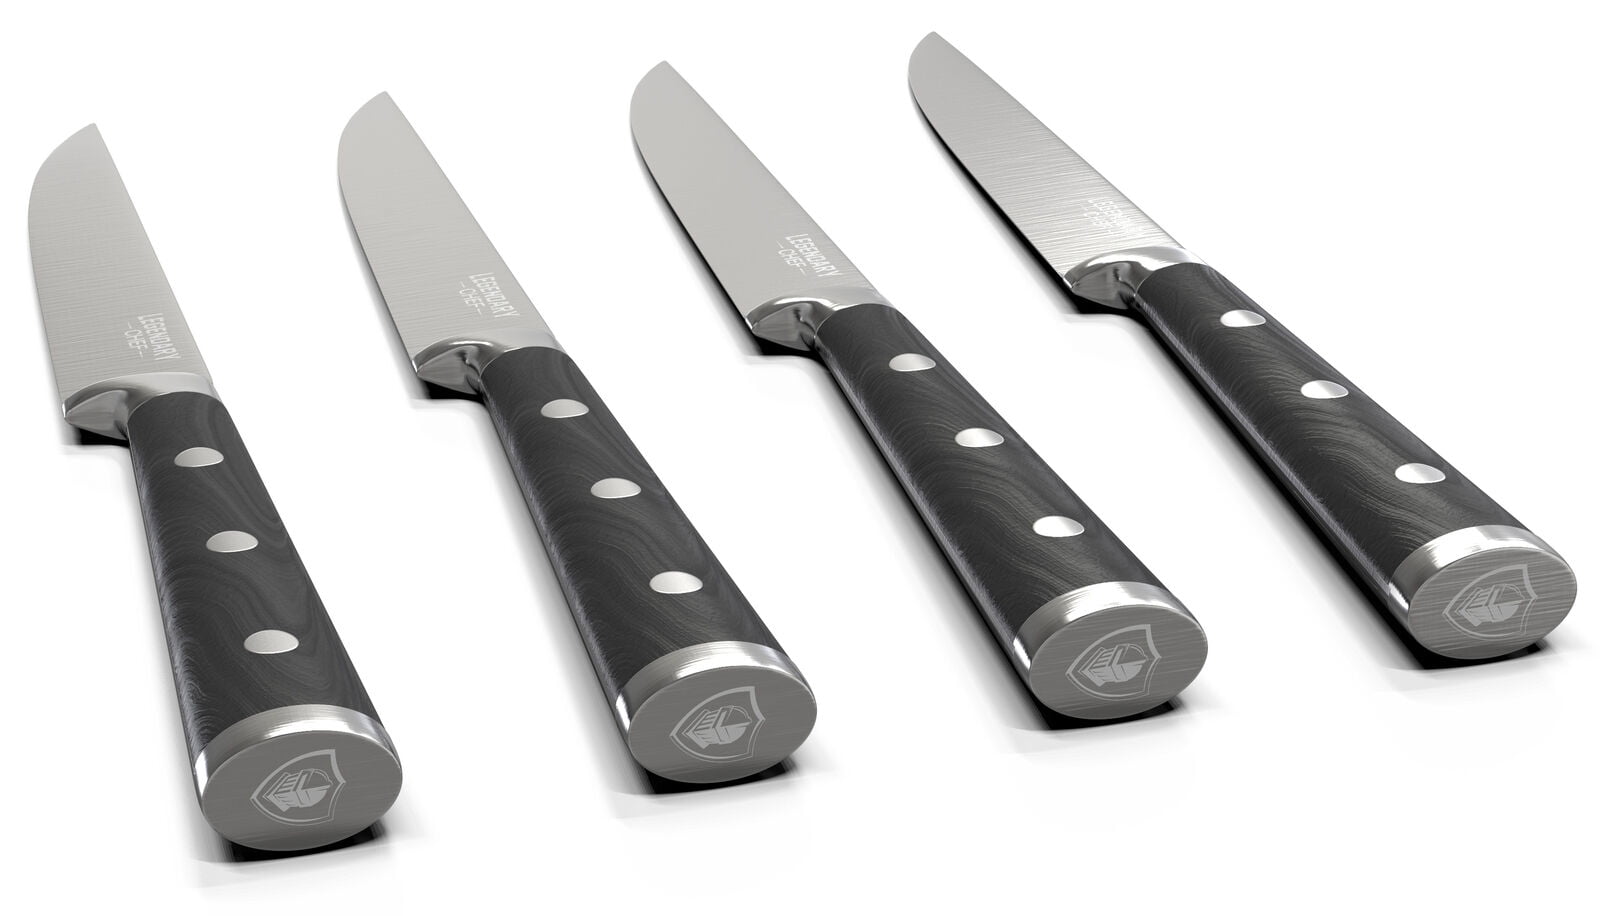  Lemeya 6 Pieces Gold Steak Knives Set of 6,Stainless Steel  Standing Steak Knife,Ultra-Sharp Serrated Steak Knives-10 Inch,Mirror  Polished,Dishwasher Safe : Sports & Outdoors